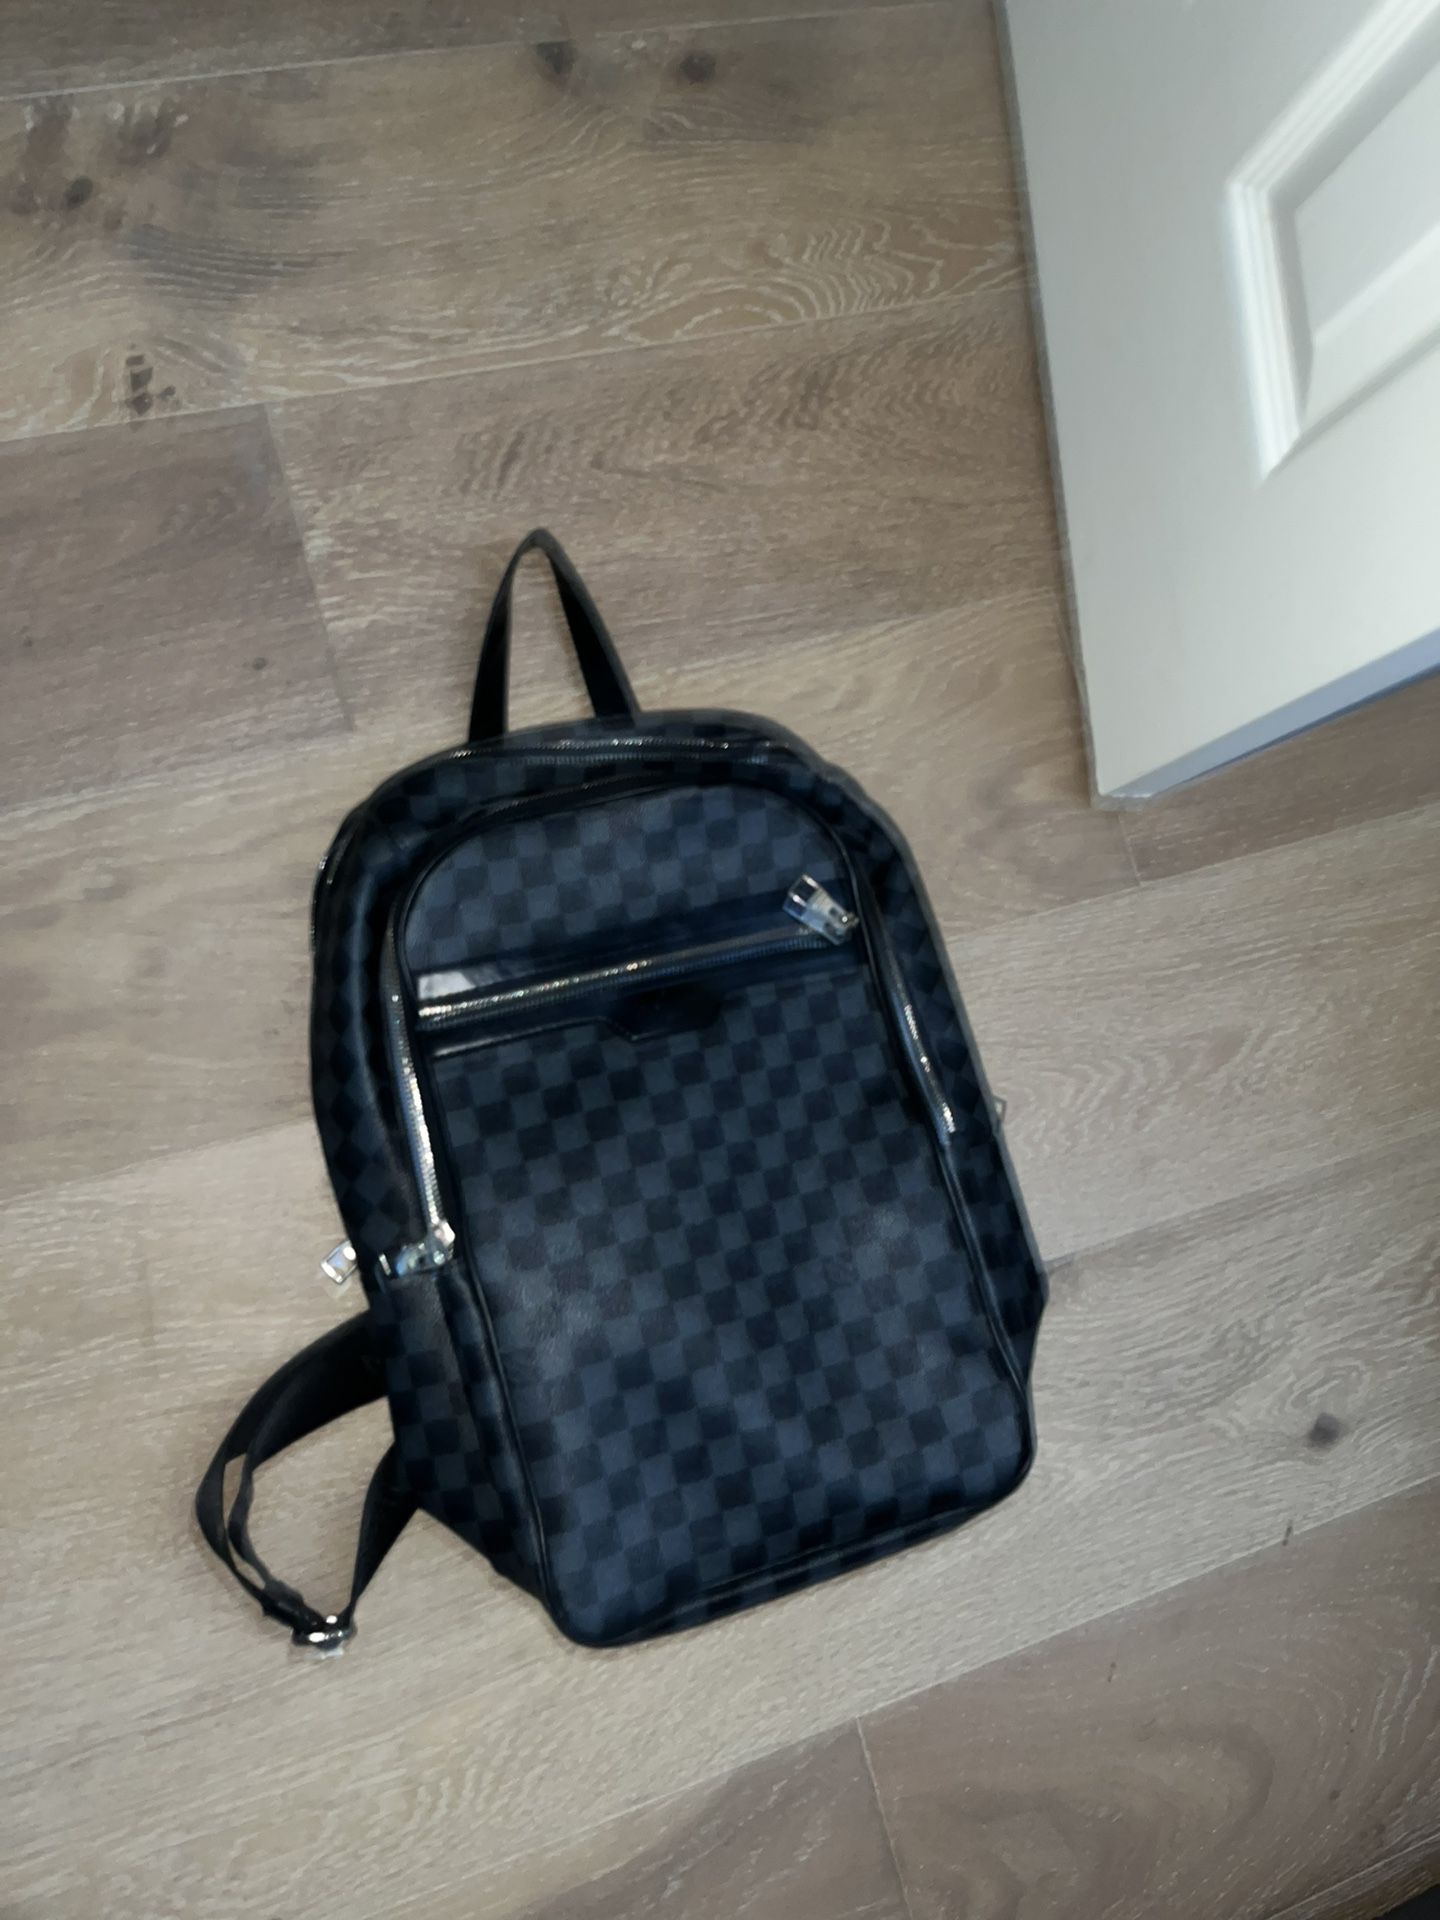 Louis Vuitton Damier Graphite Michael Backpack NV2 for Sale in San